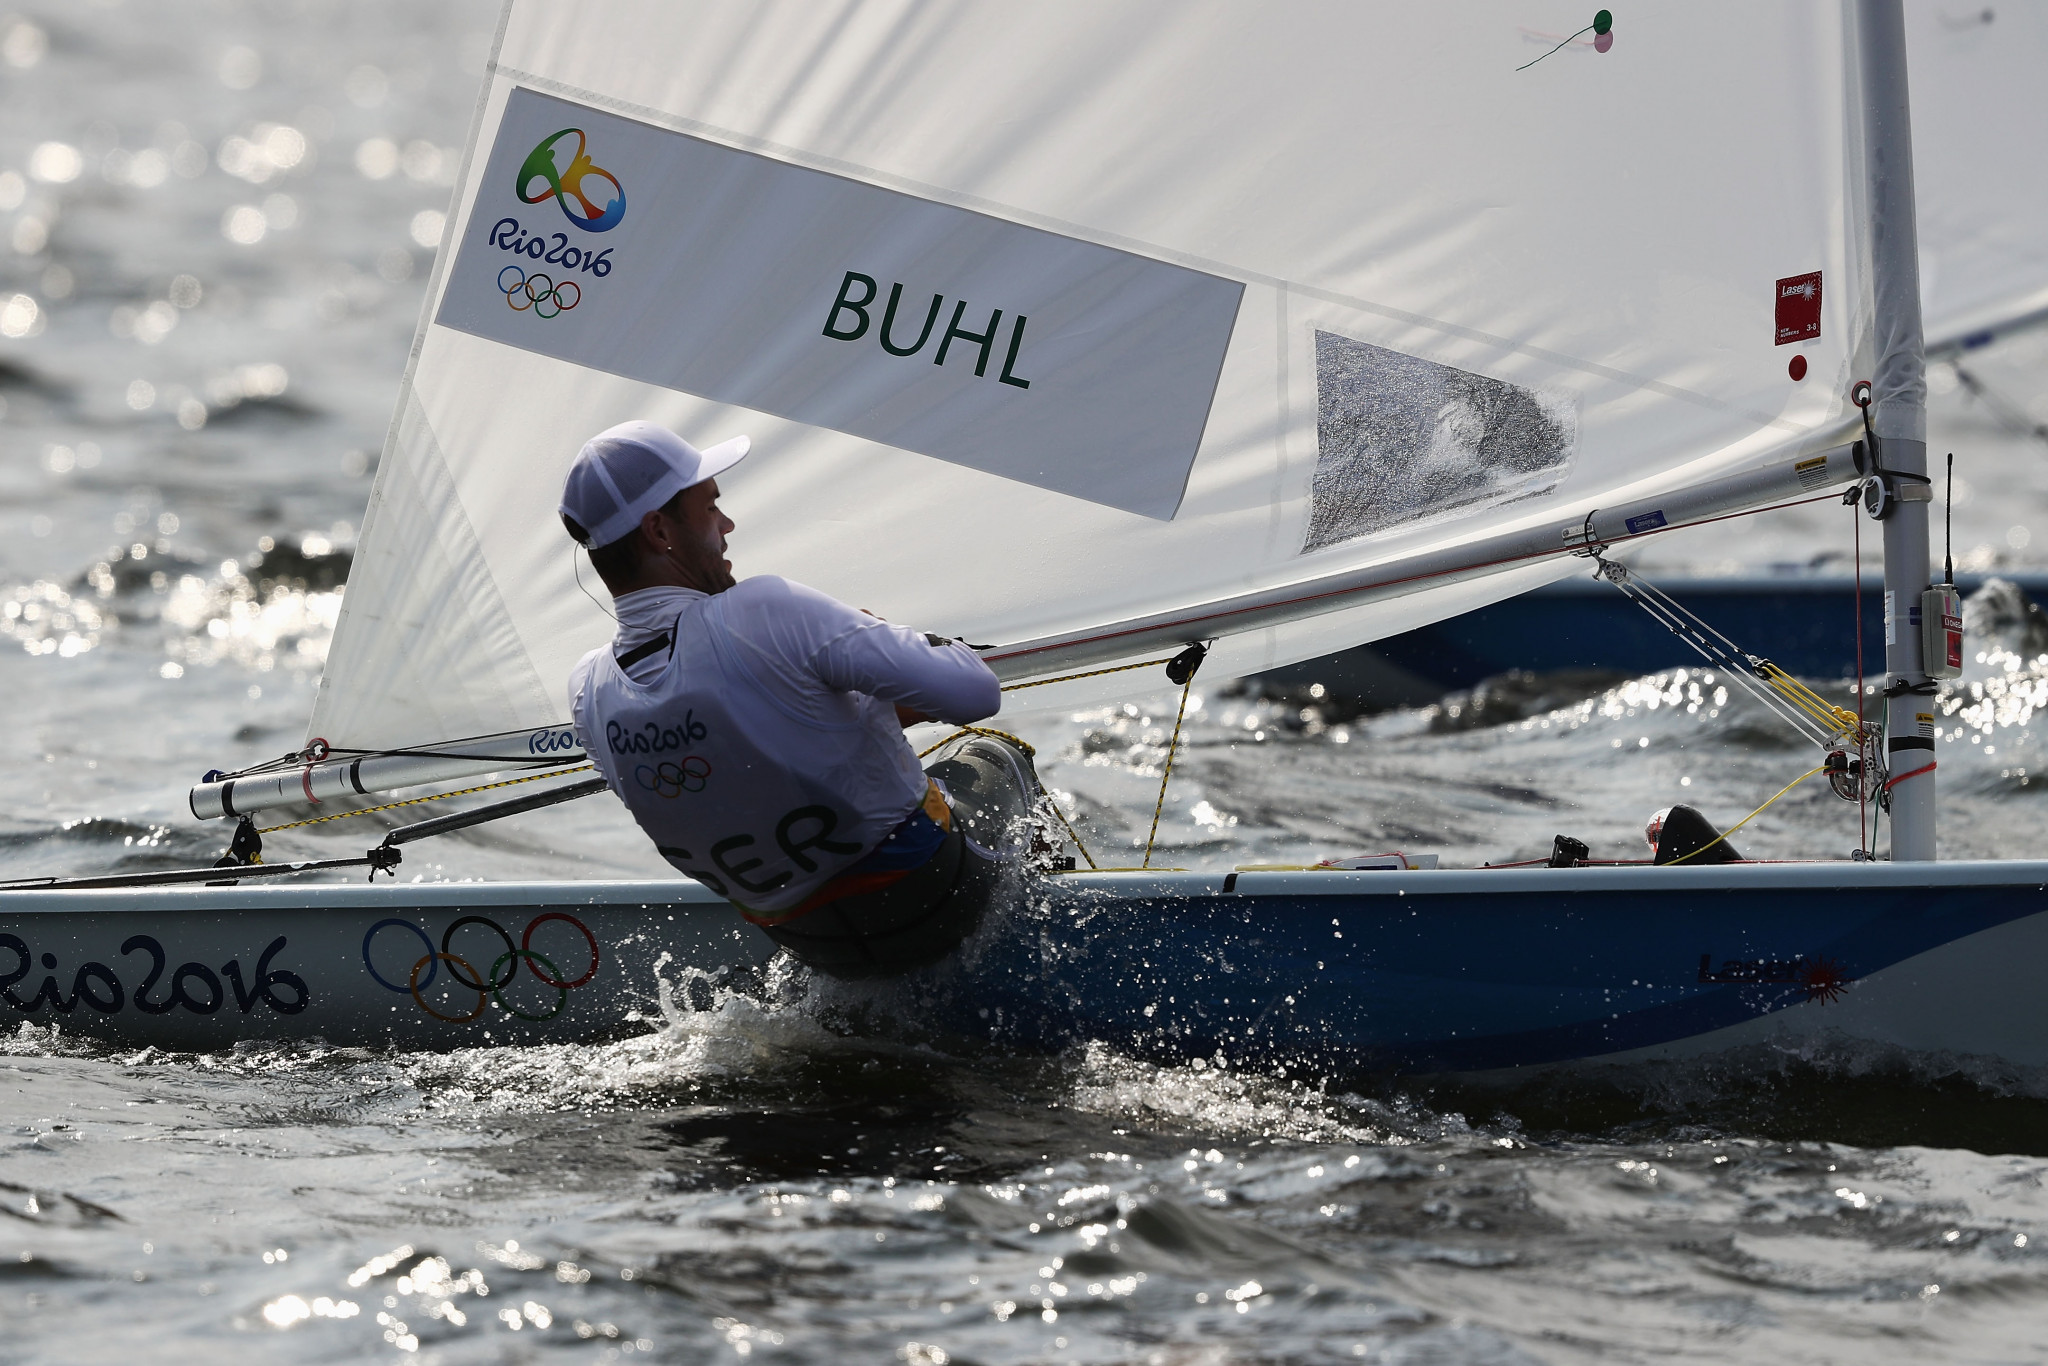 Philipp Buhl grabbed a share of the lead at the Laser Standard World Championships ©Getty Images